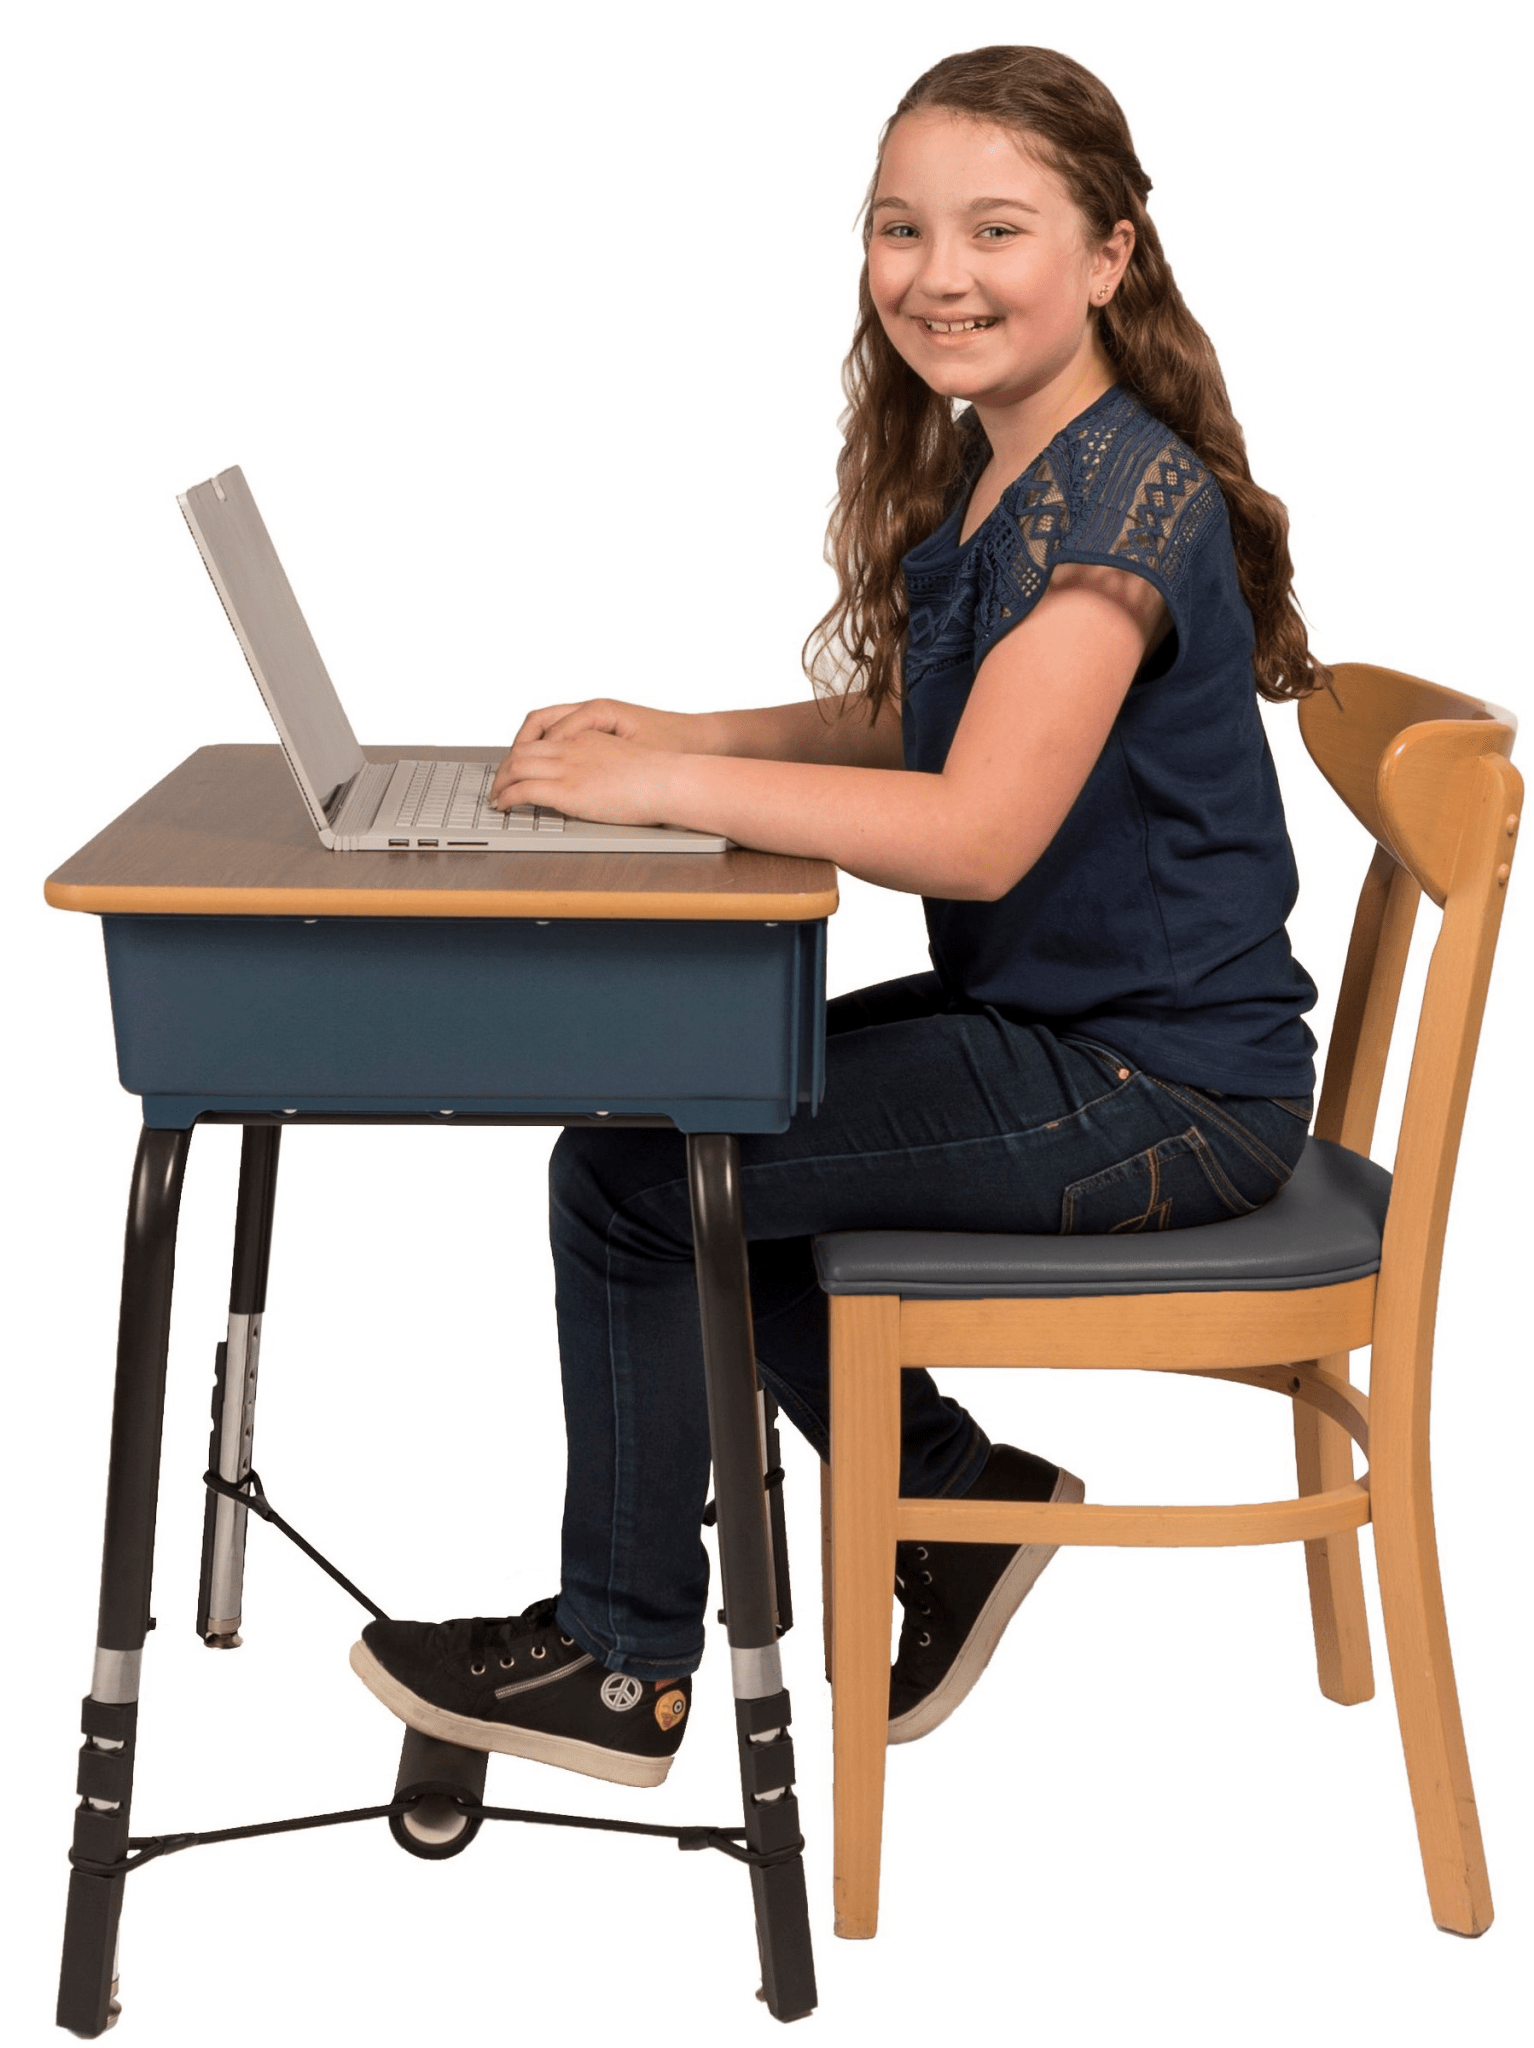 FootFidget 2.0 The Only Ergonomic Under - Desk Footrest for Improved Focus & Learning ADHD Friendly (FF1919) - SchoolOutlet